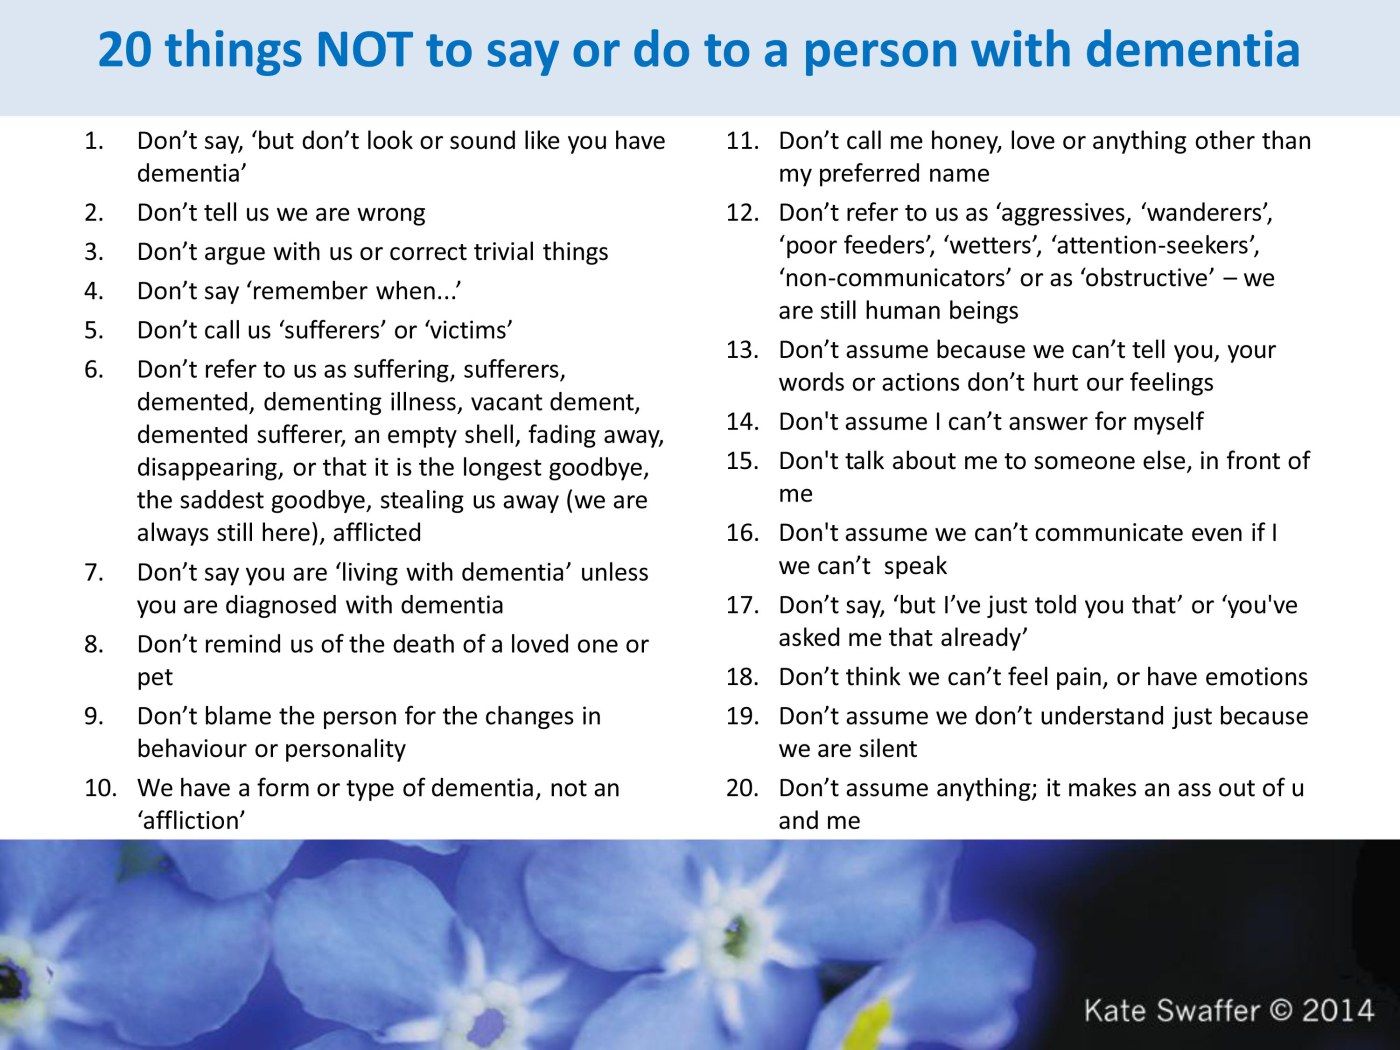 20 things not to say or do to a person with dementia